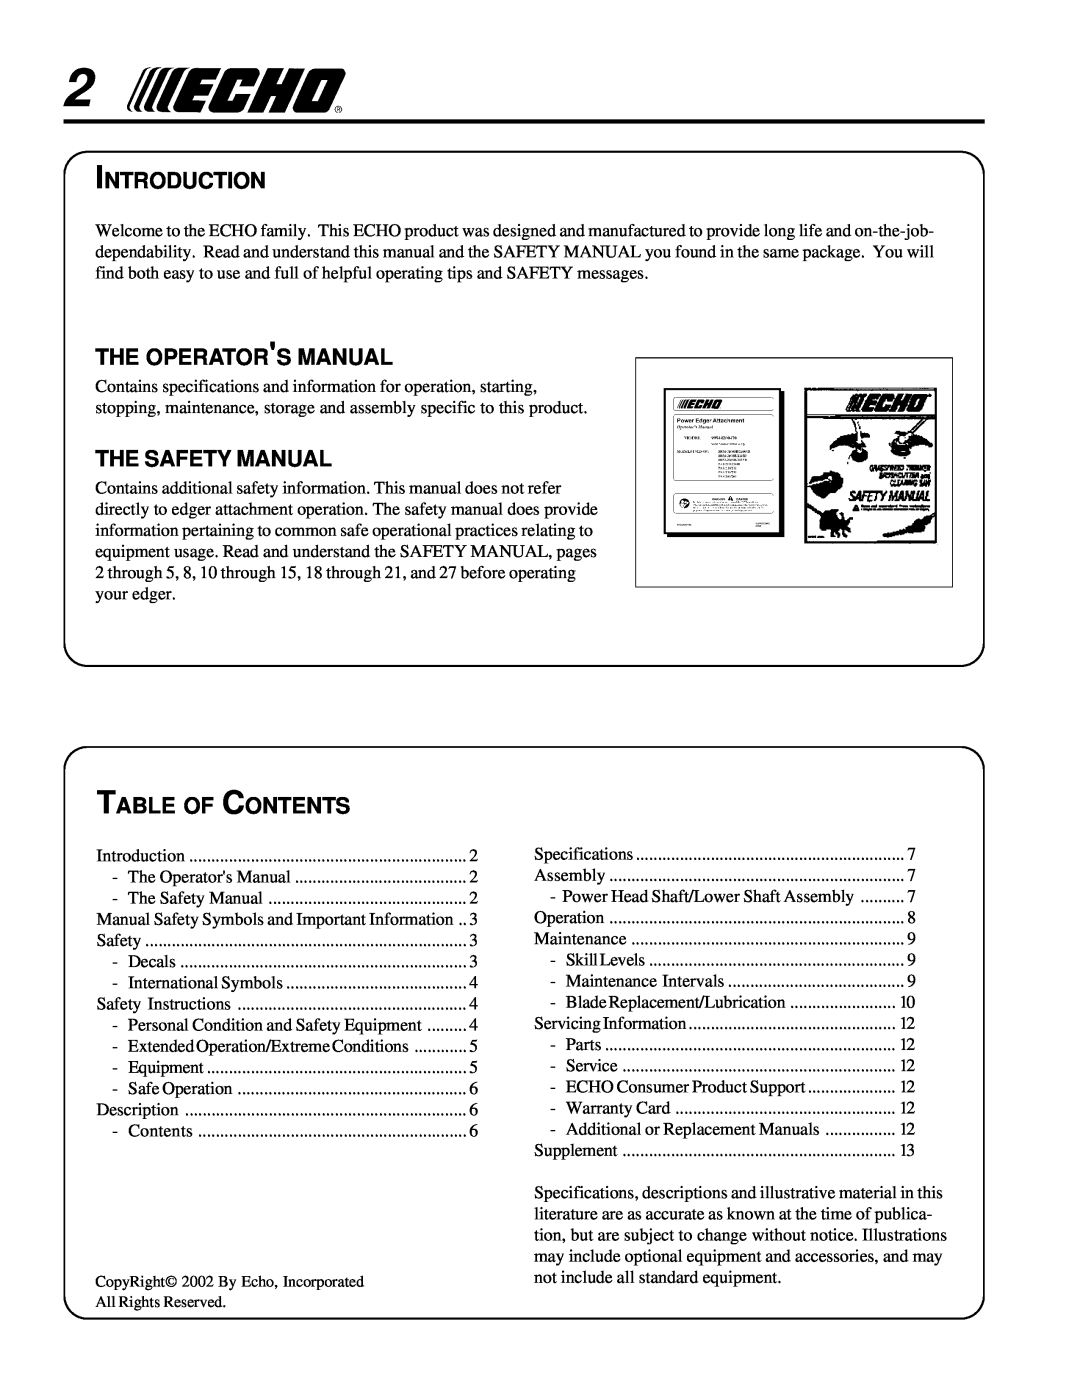 Echo 99944200470 manual Introduction, The Operators Manual, The Safety Manual, Table Of Contents 